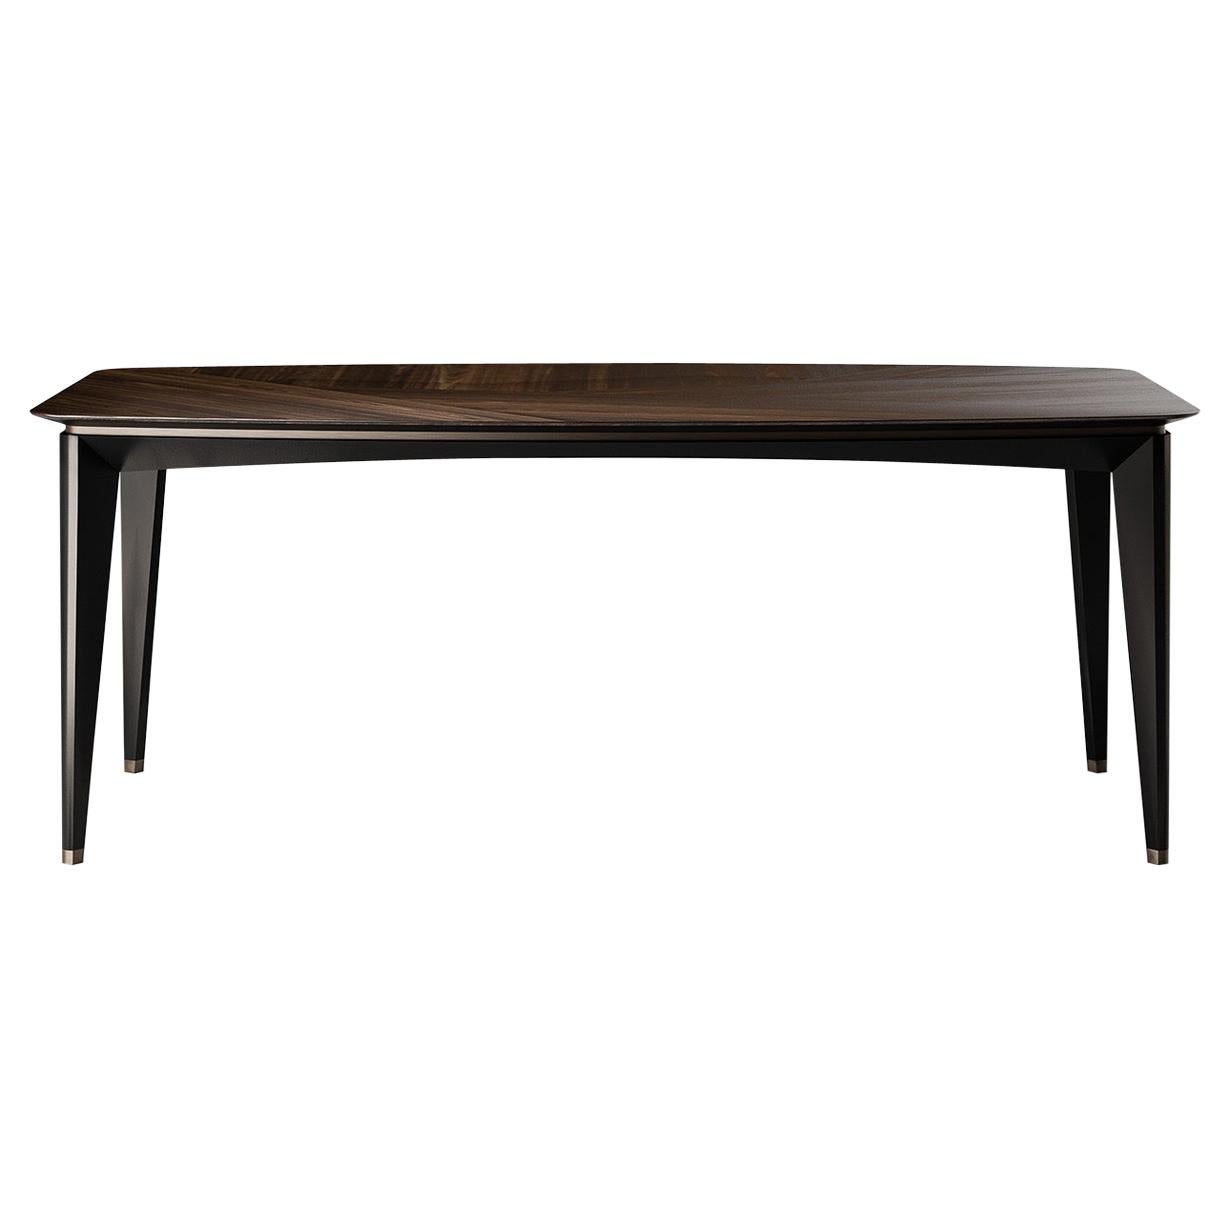 E213 Eclipse Rectangular Dining Table For Sale